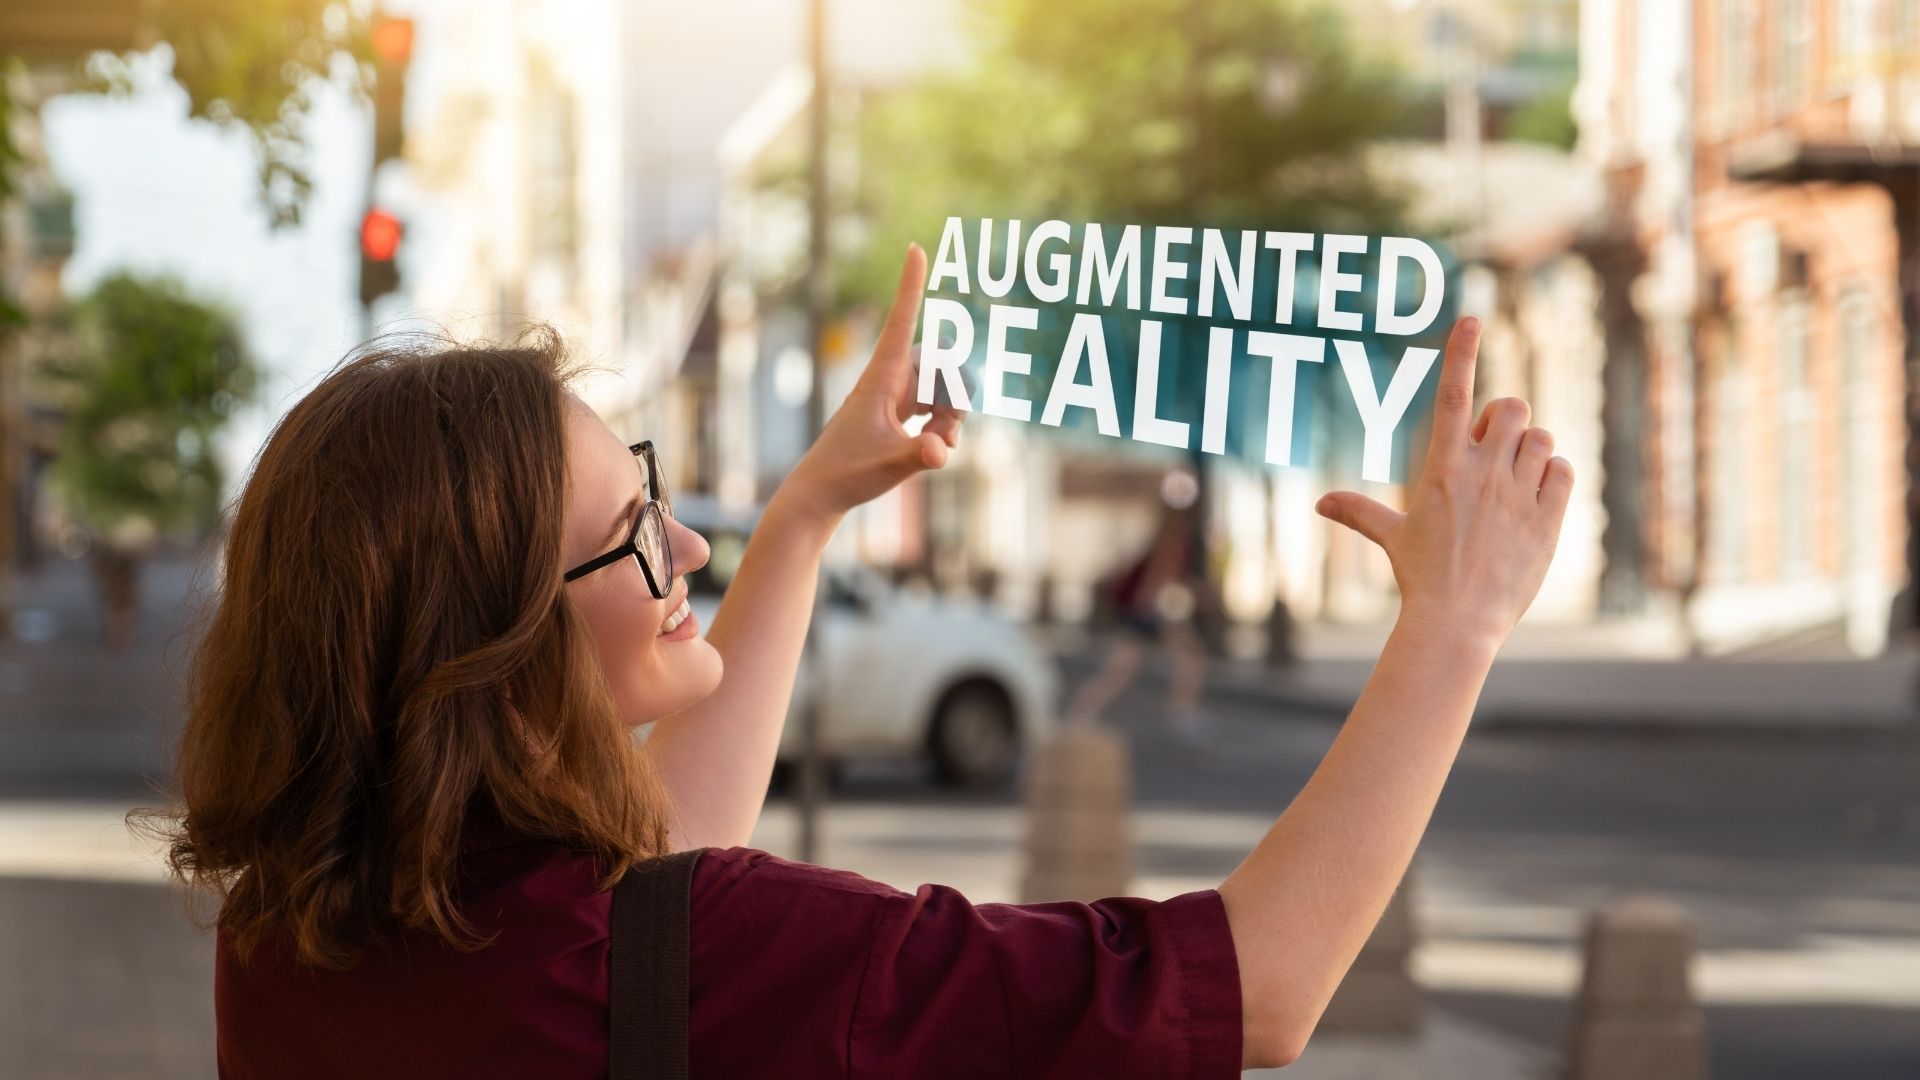 Augmented reality